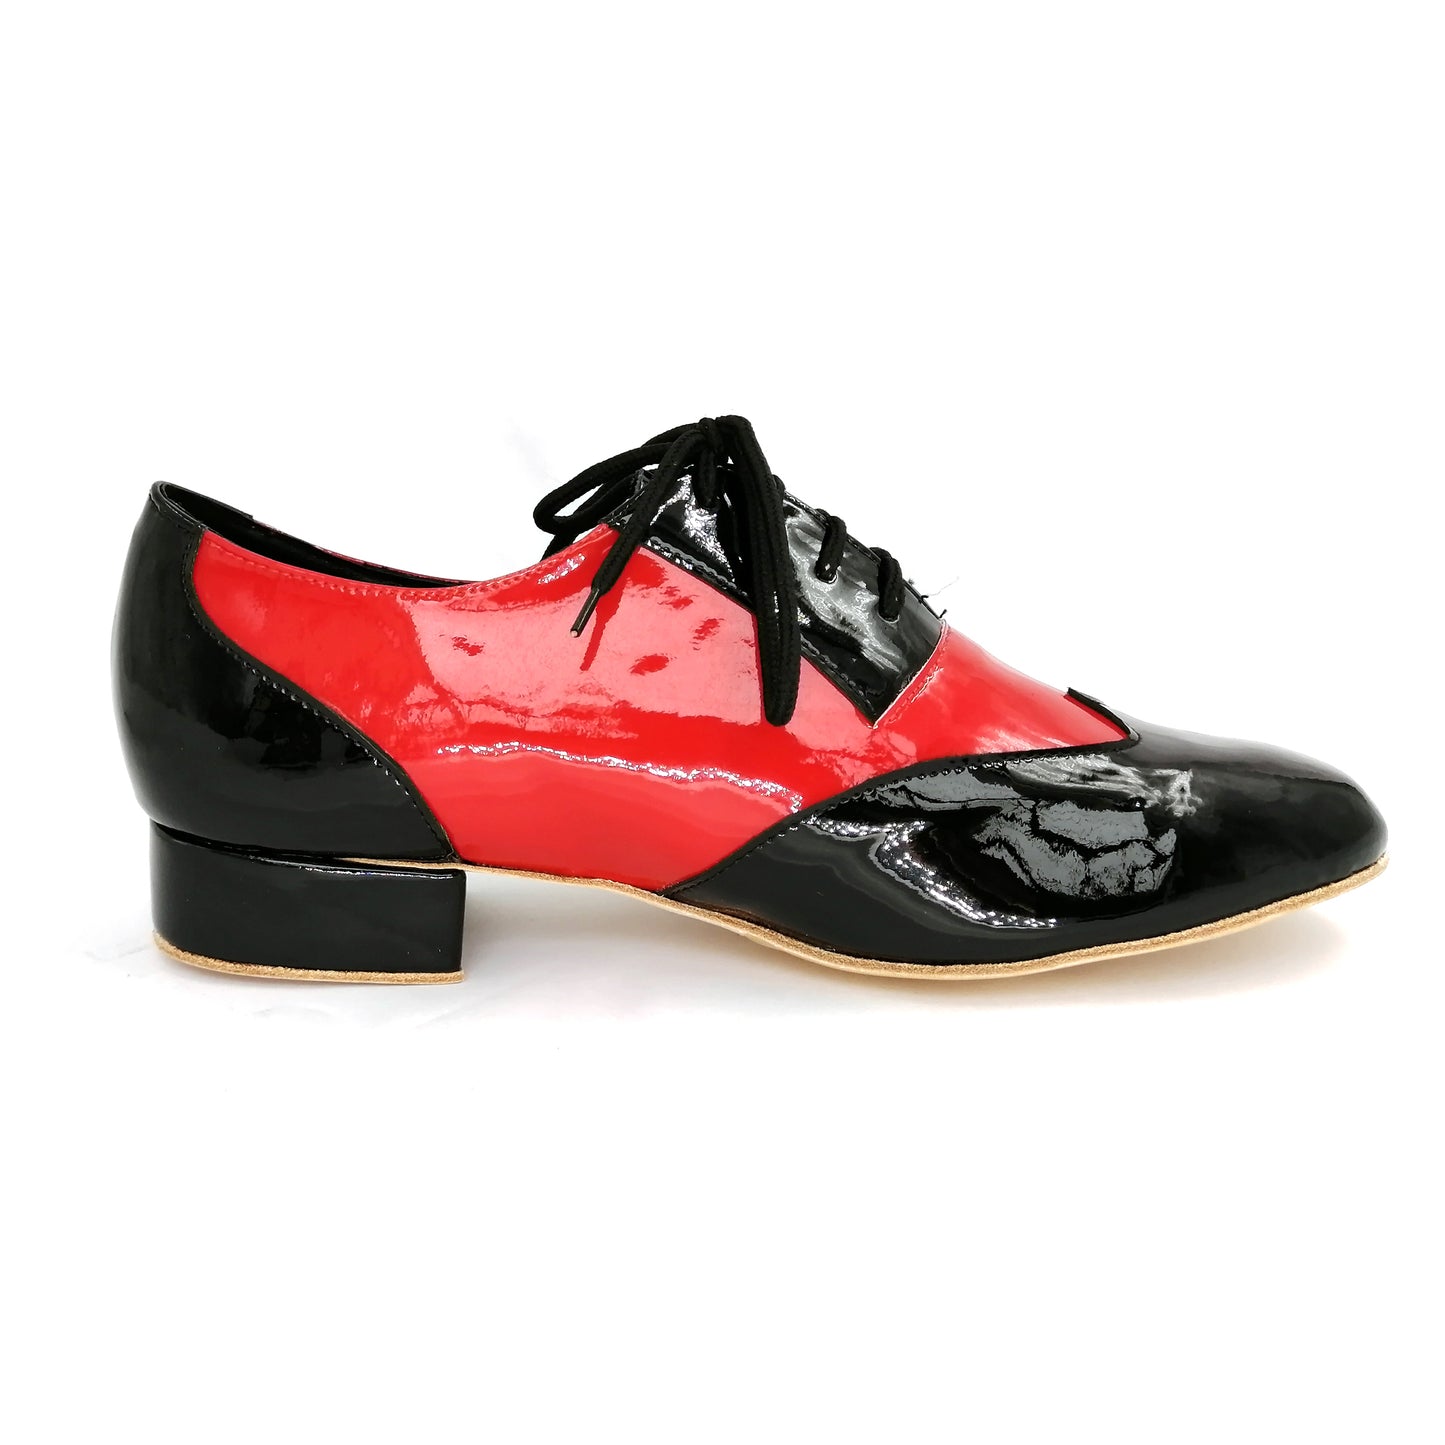 Pro Dancer Men's Tango Shoes Leather Sole 1 inch Heel Lace-up Red and Black (PD-1005A)